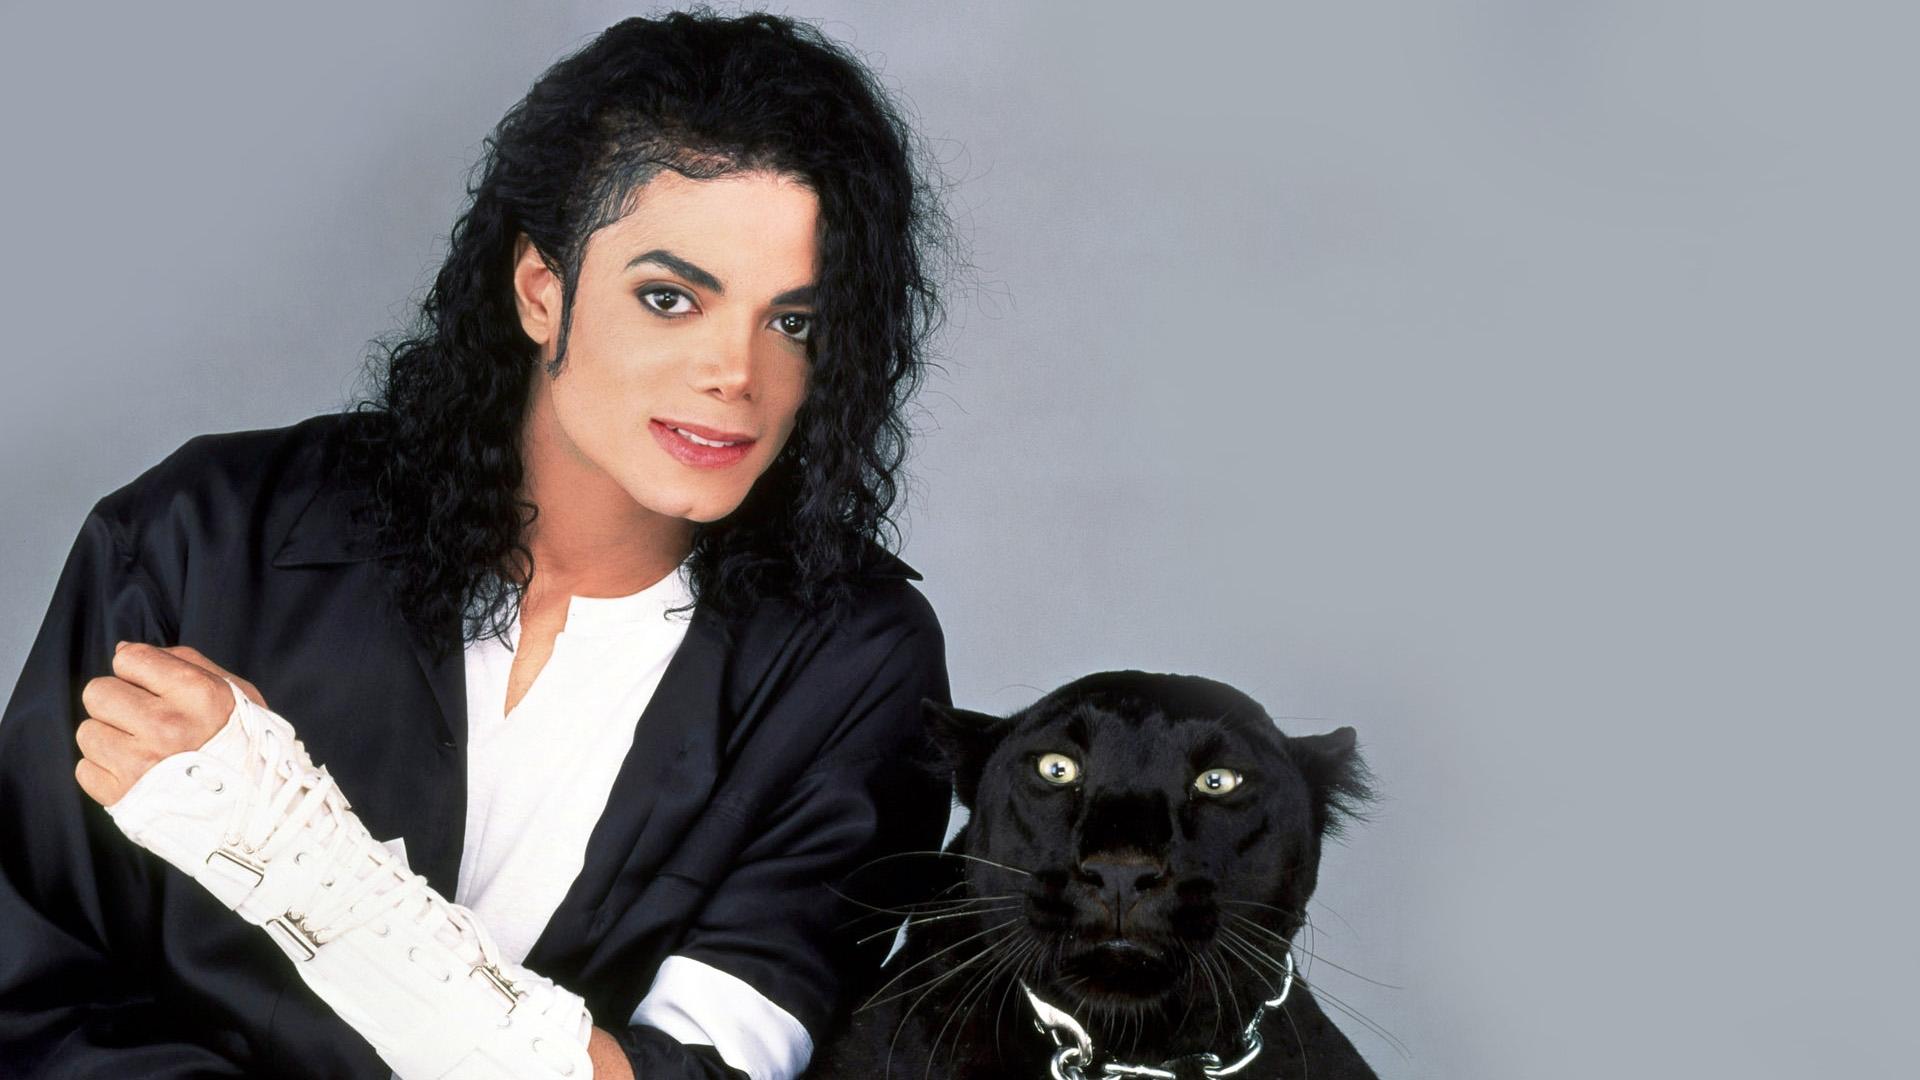 1920 x 1080 · jpeg - Michael Jackson Wallpapers, Pictures, Images